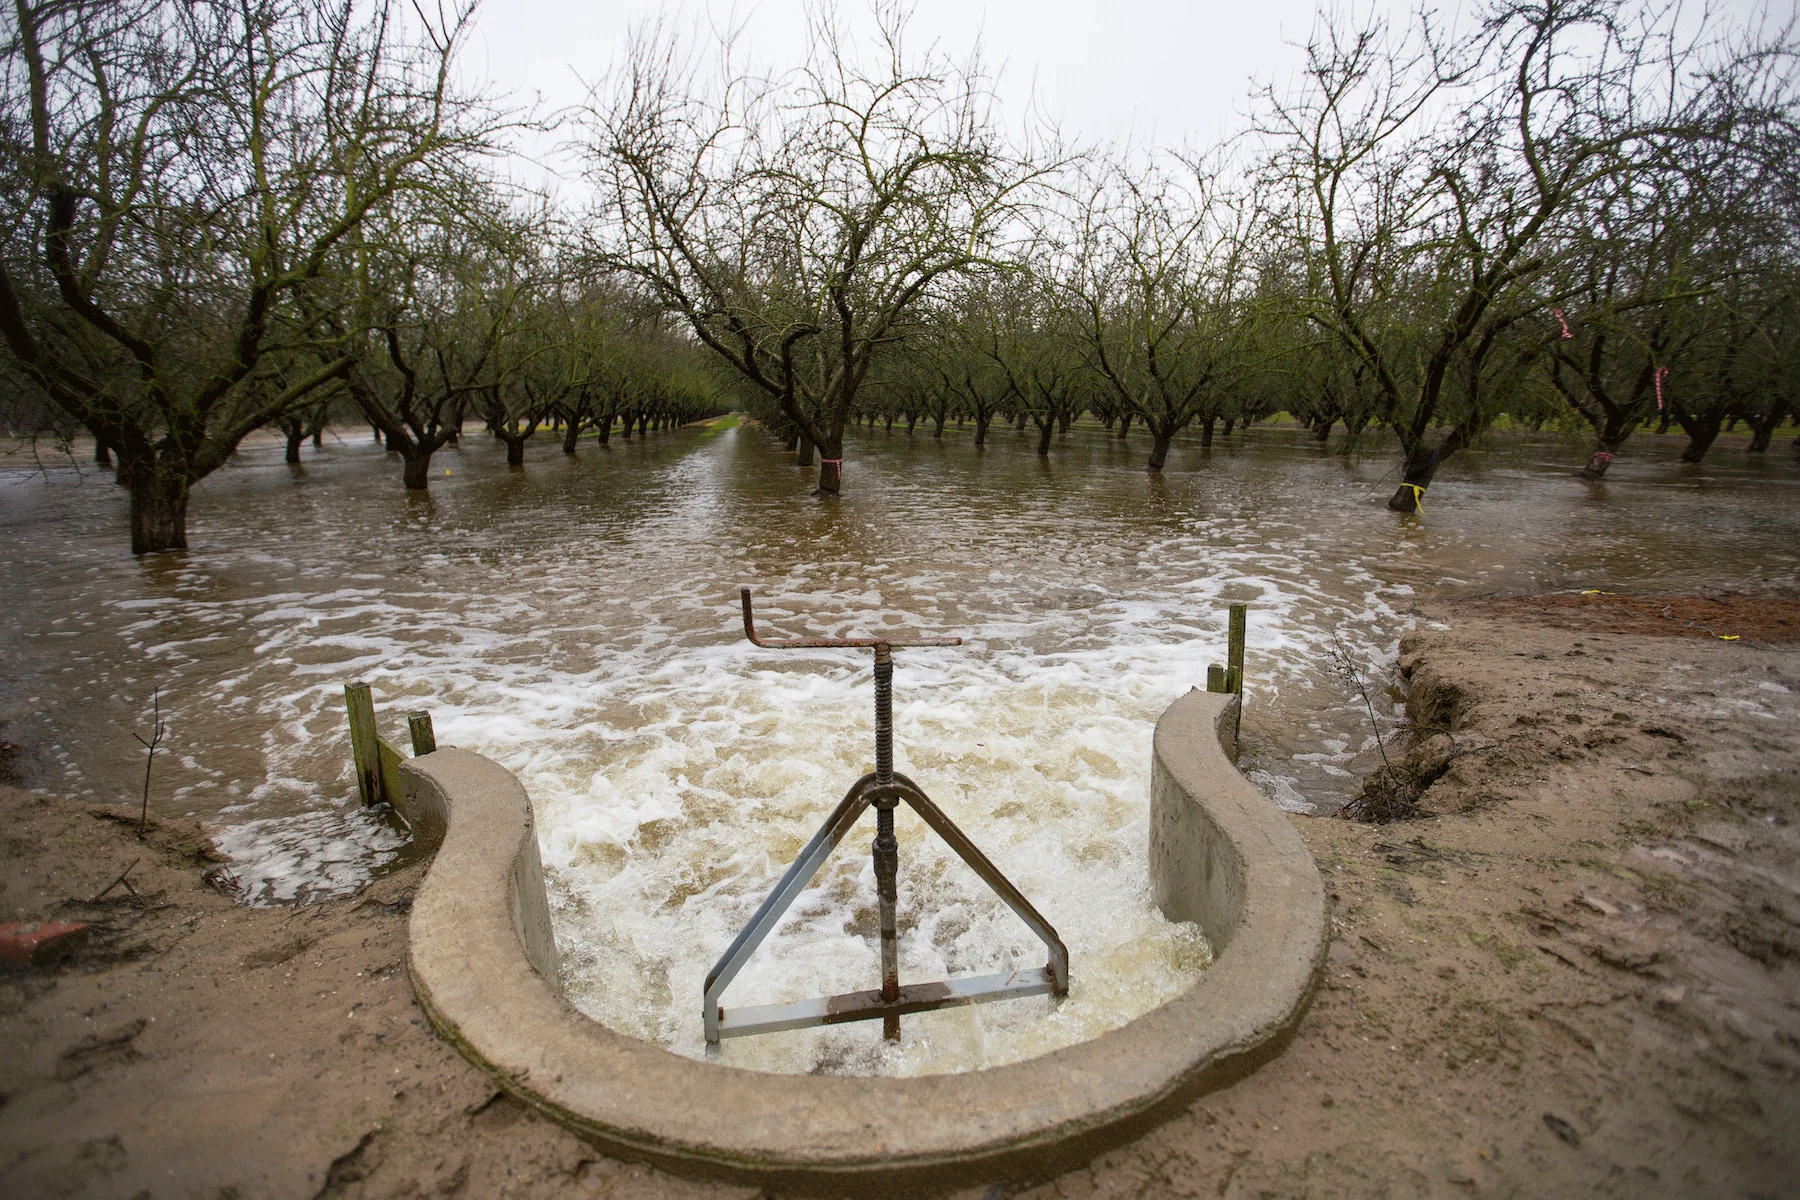 Diverted water spills into an almond orchard in Modesto, California, in November of 2016 to help recharge the aquifer beneath the field. UC Davis scientists are studying managed aquifer recharge as a solution to California’s groundwater overpumping. (Curtis Jerome Haynes)